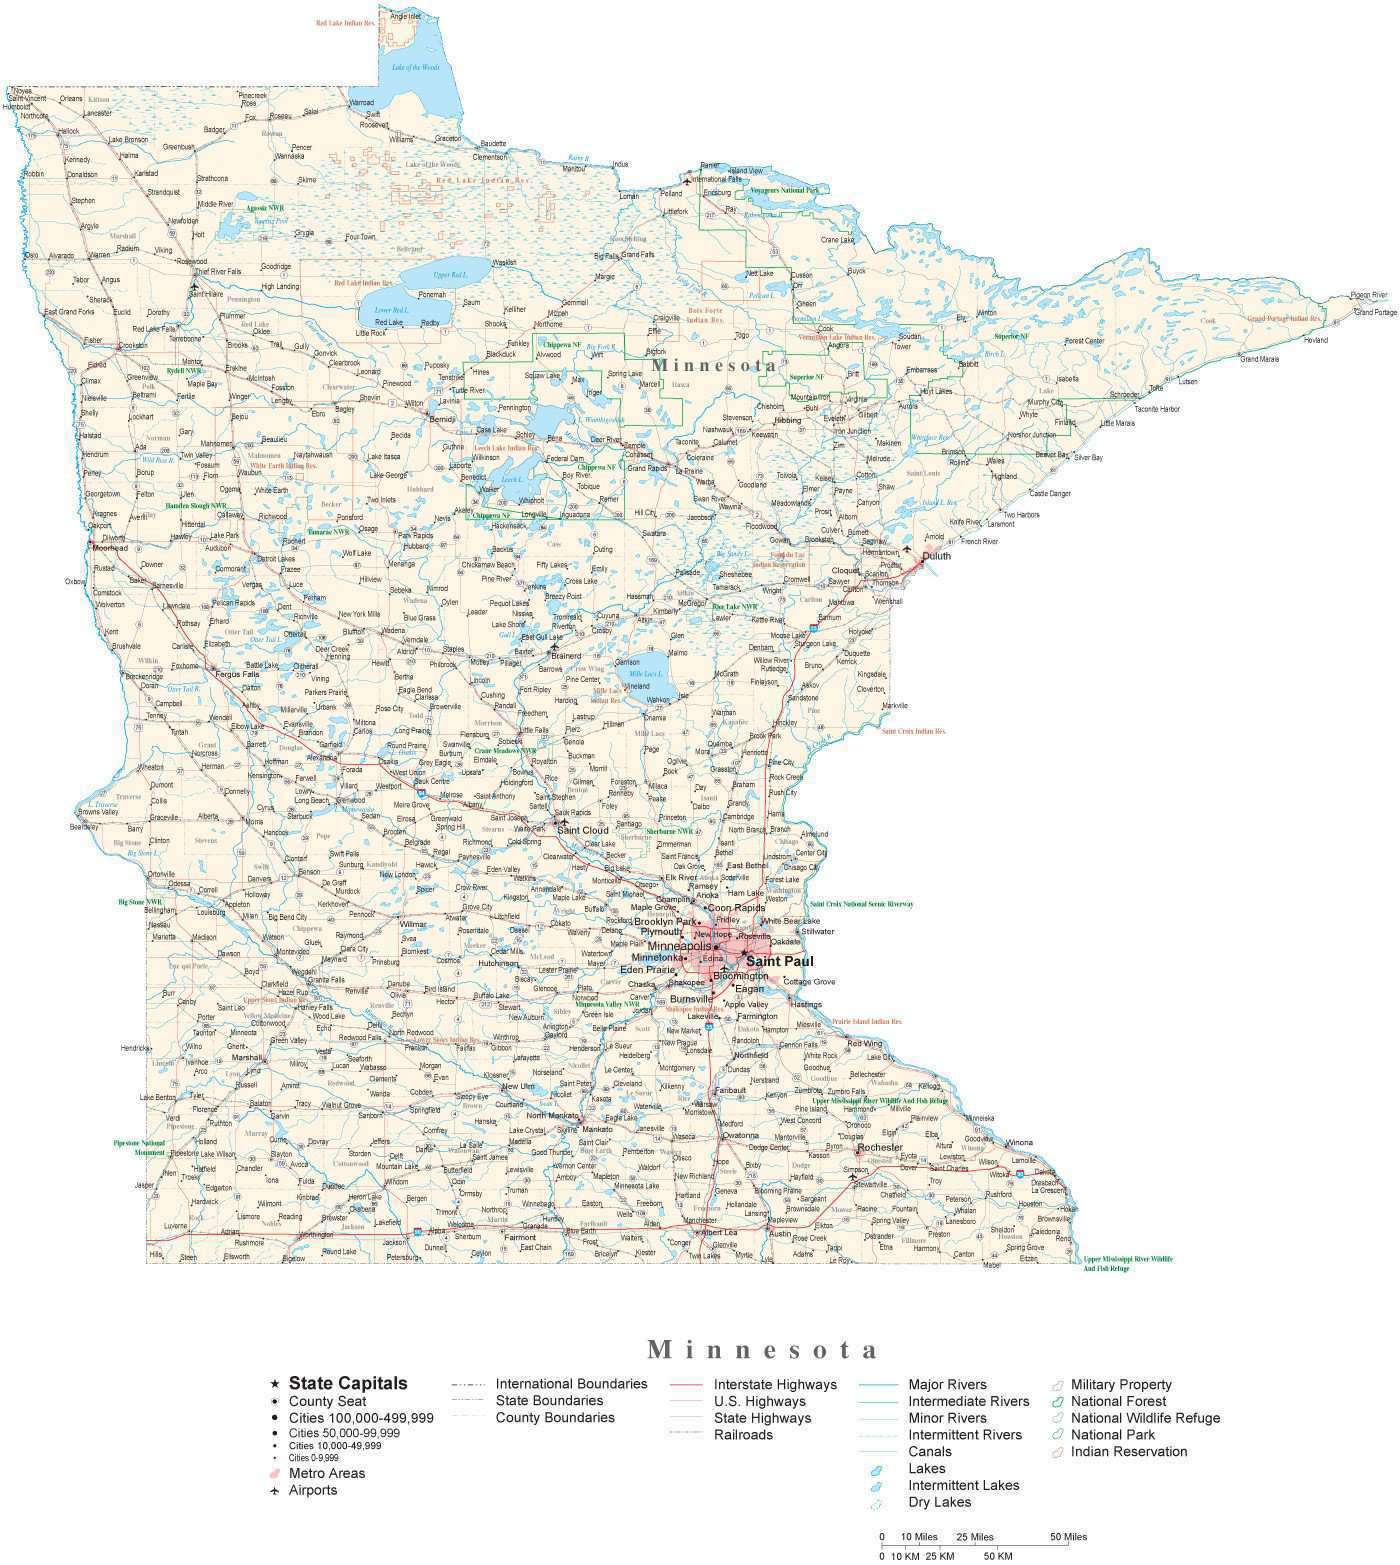 minnesota-detailed-cut-out-style-state-map-in-adobe-illustrator-vector-format-detailed